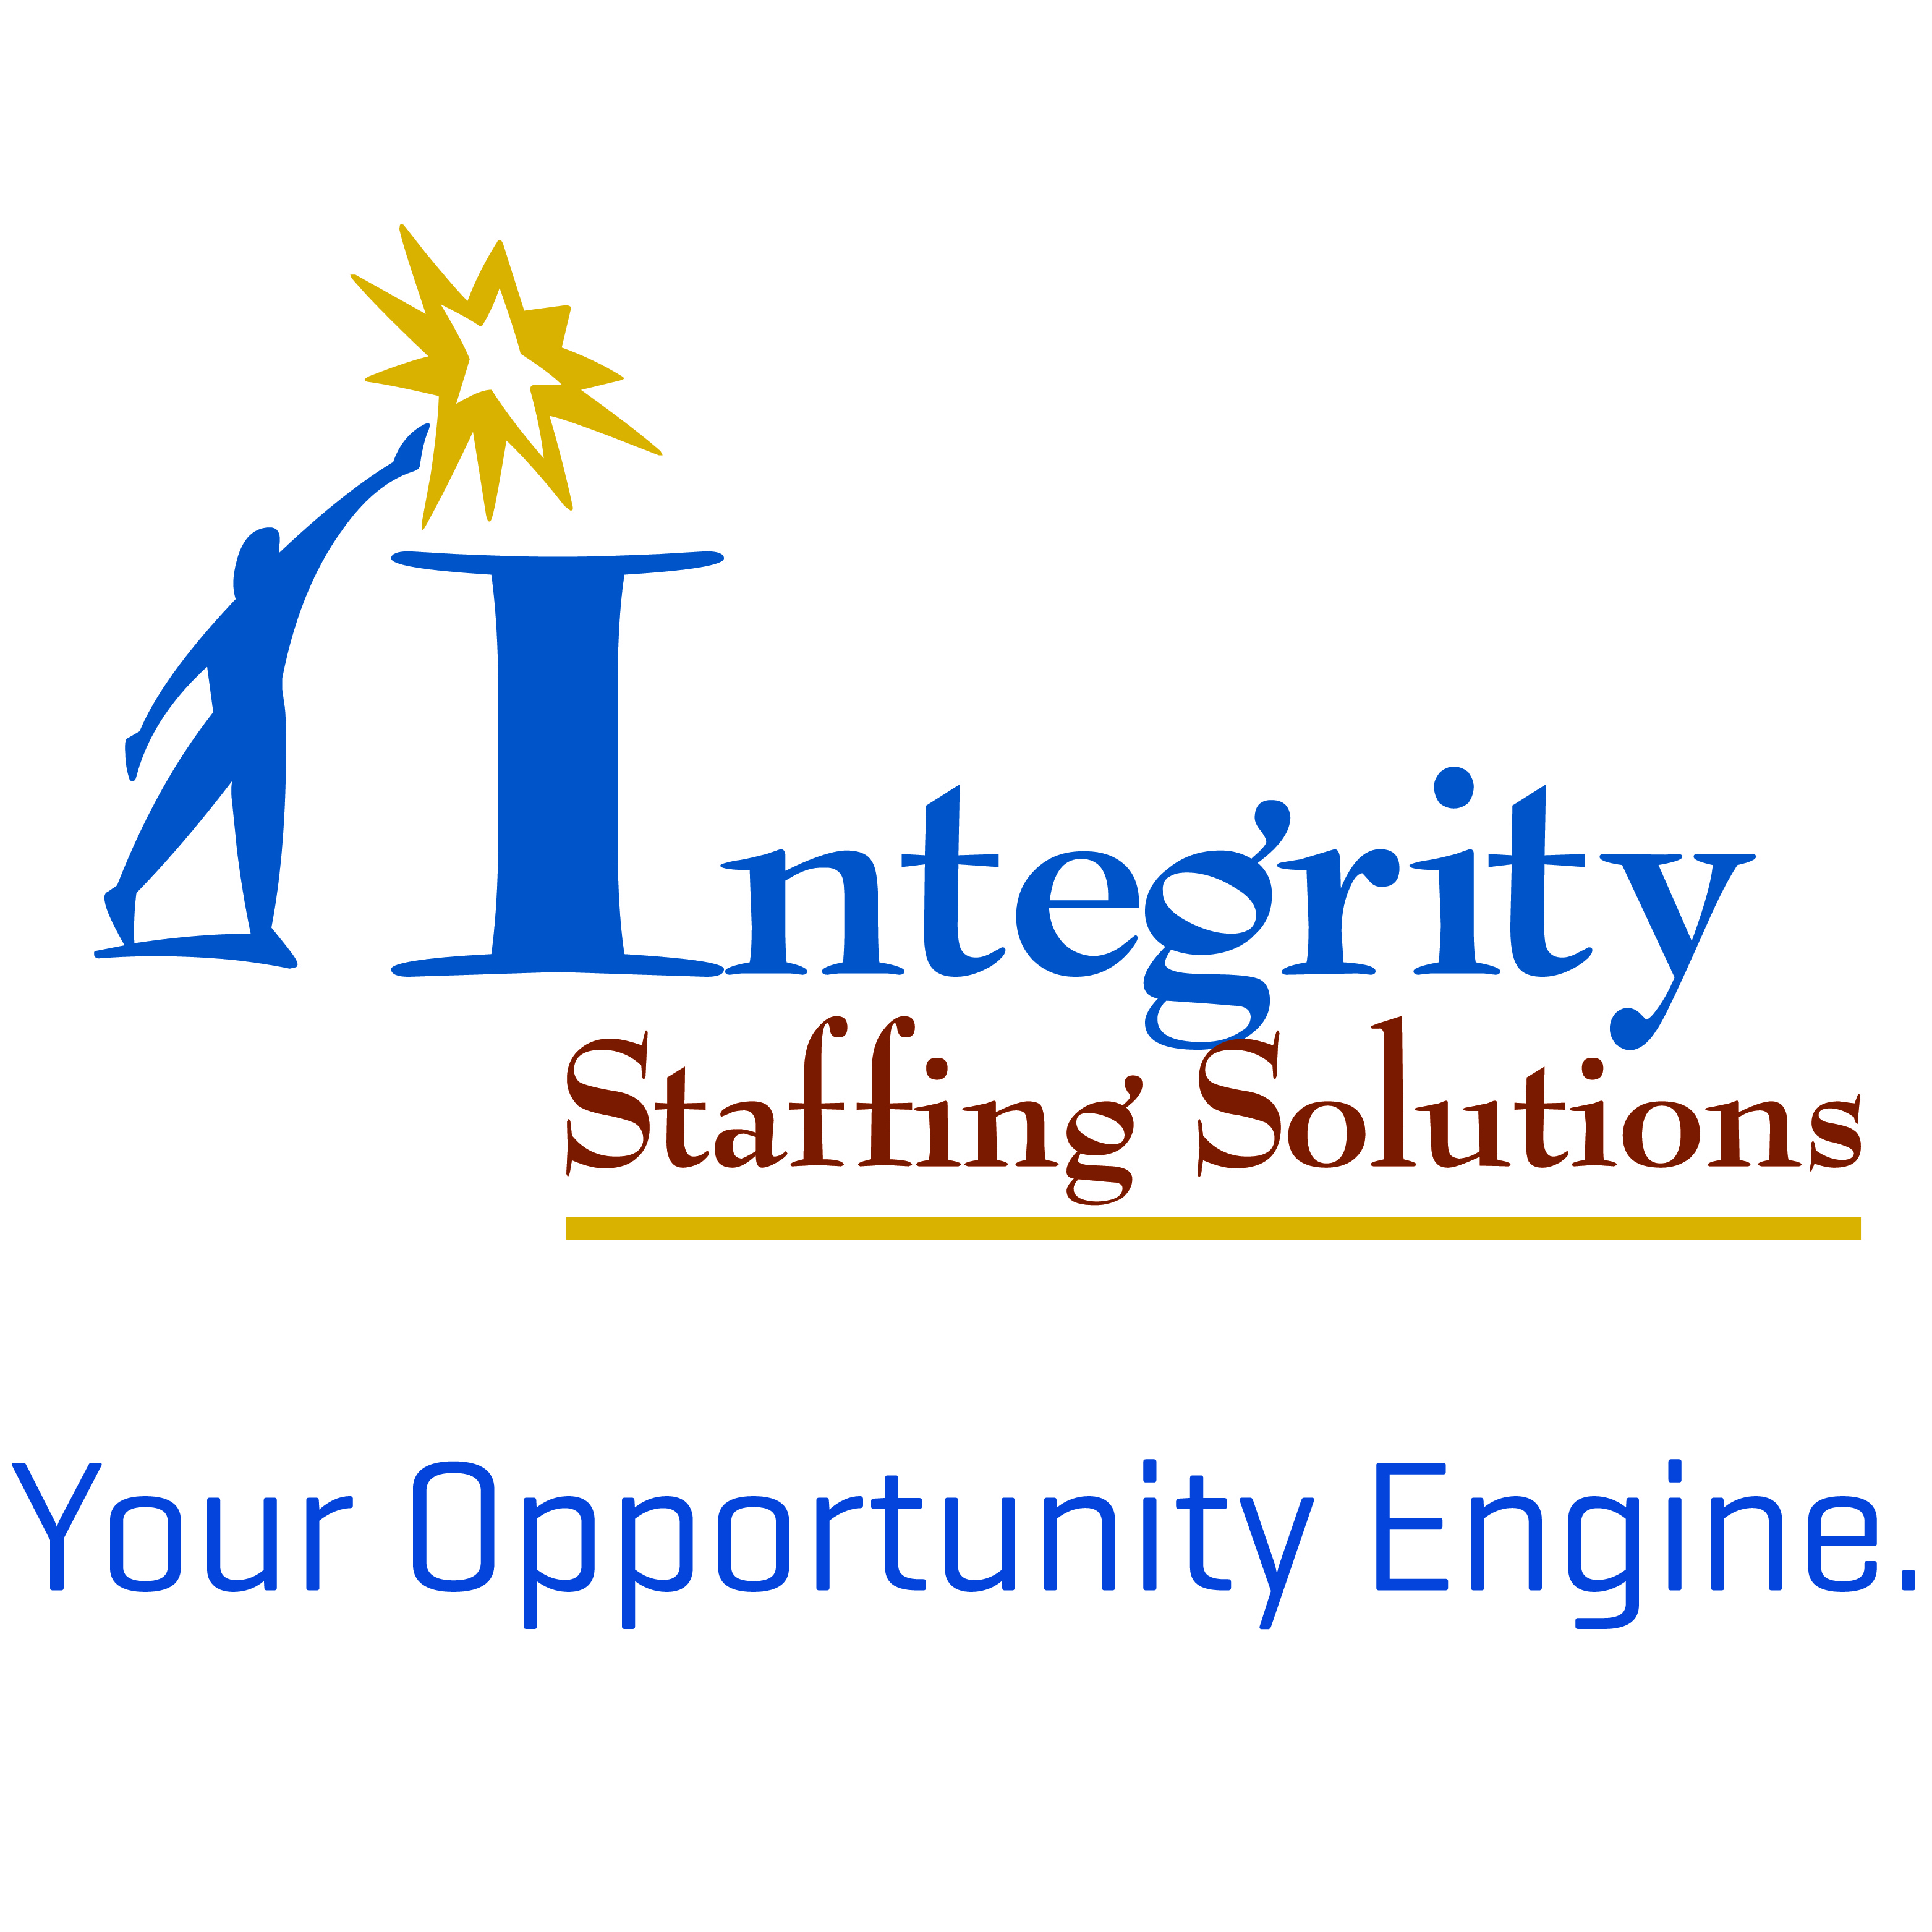 Integrity Staffing Solutions Logo